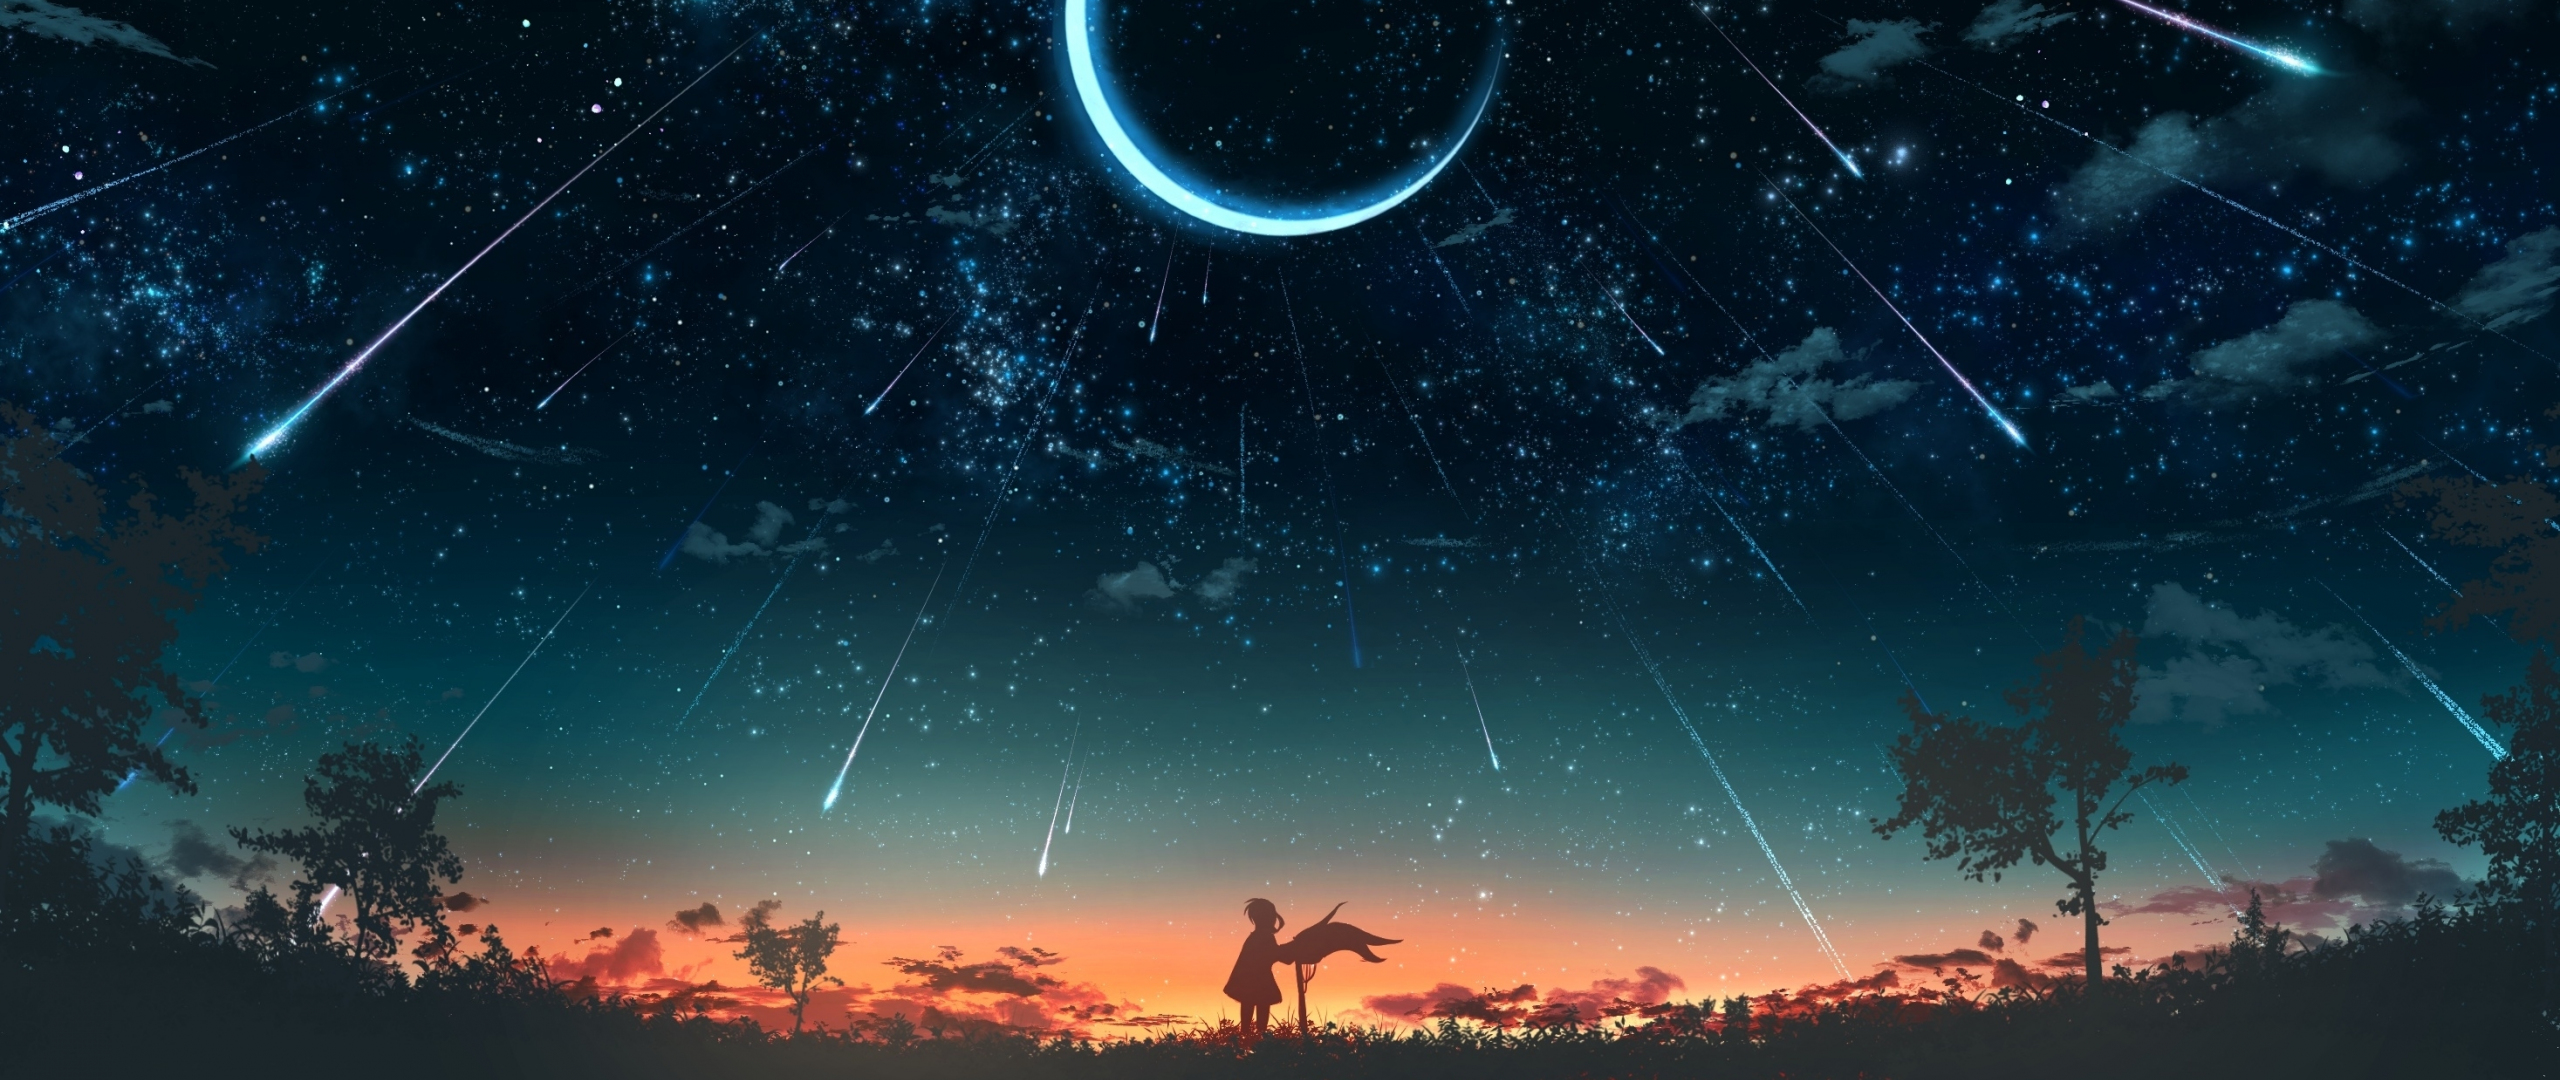 Download Anime Original Night Crescent Silhouette Star Trails 2560x1080 Wallpaper Dual Wide 2560x1080 Hd Image Background